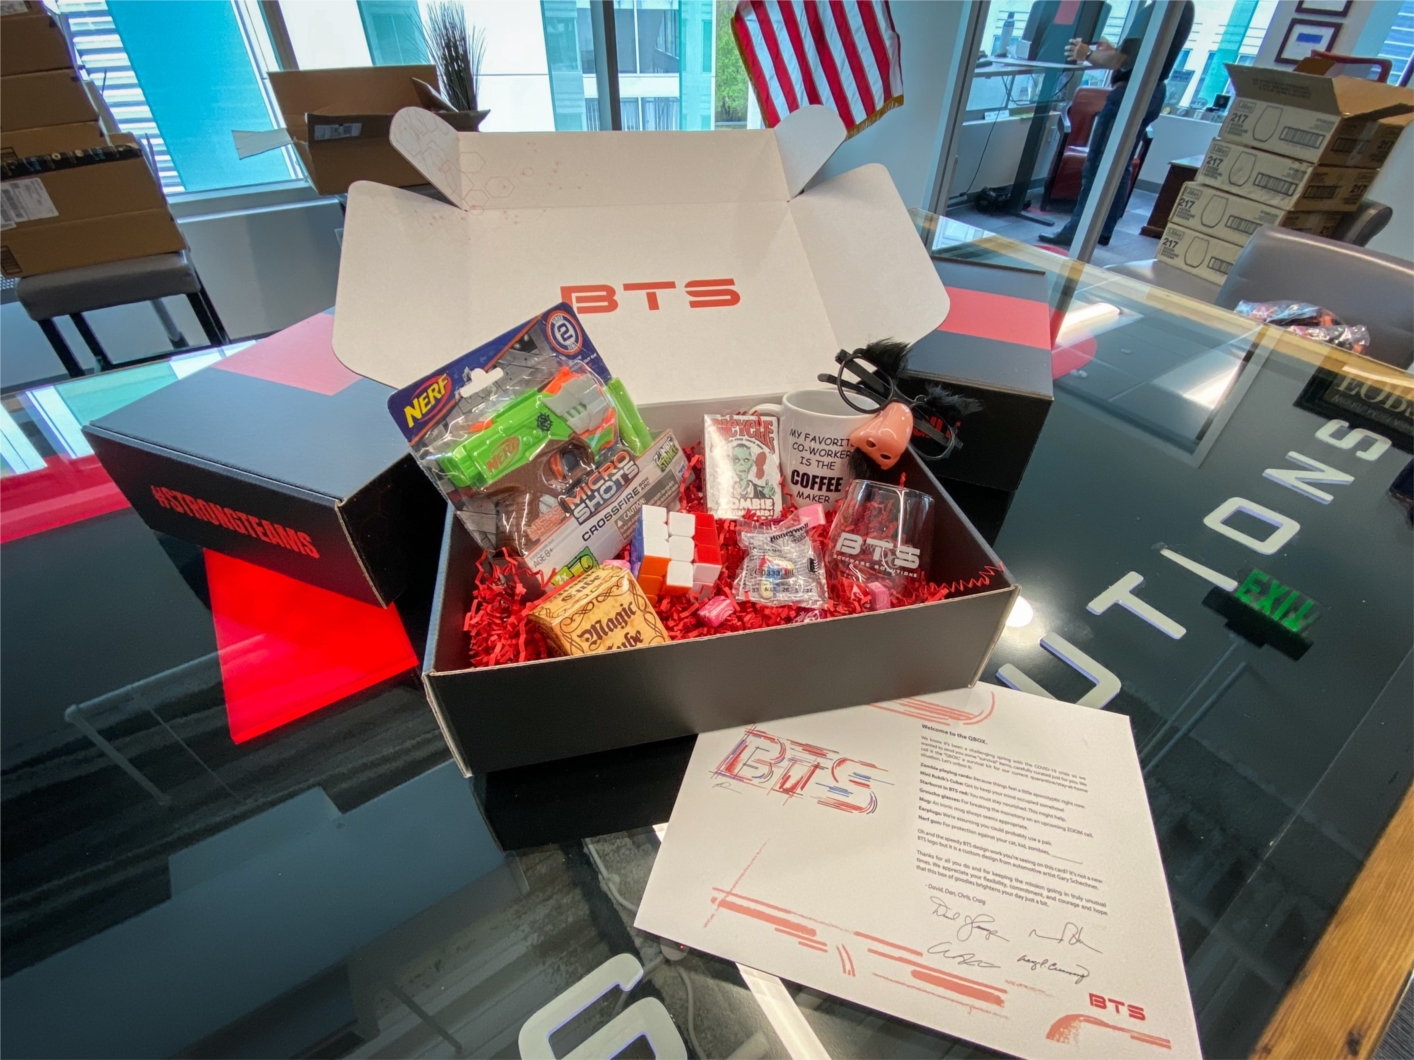 BTS Q-boxes sent to employees during the 2020 pandemic to bring a little fun while stuck at home.